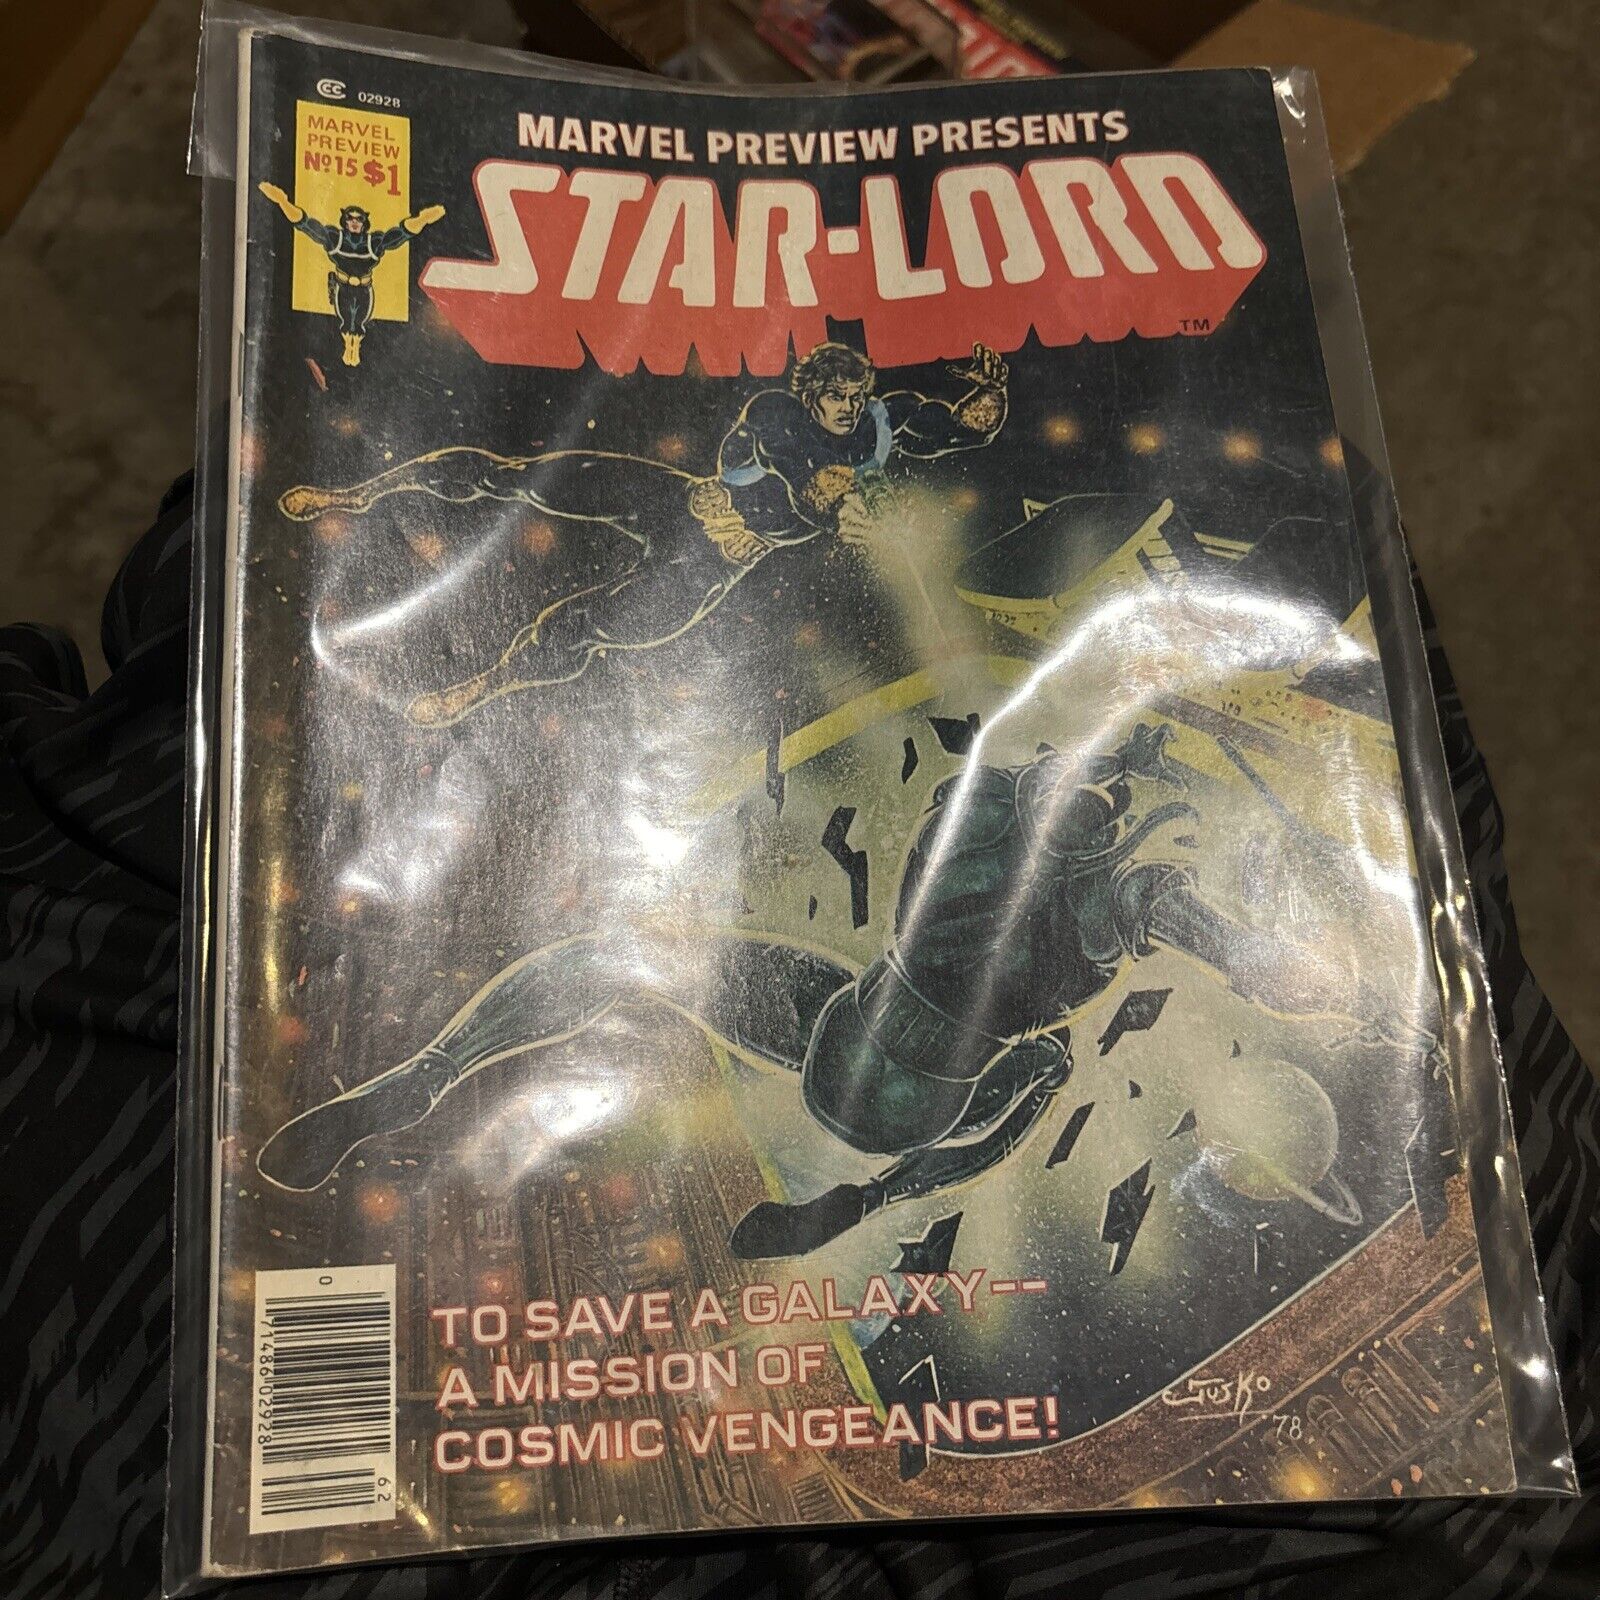 Marvel Preview Presents STAR-LORD #15